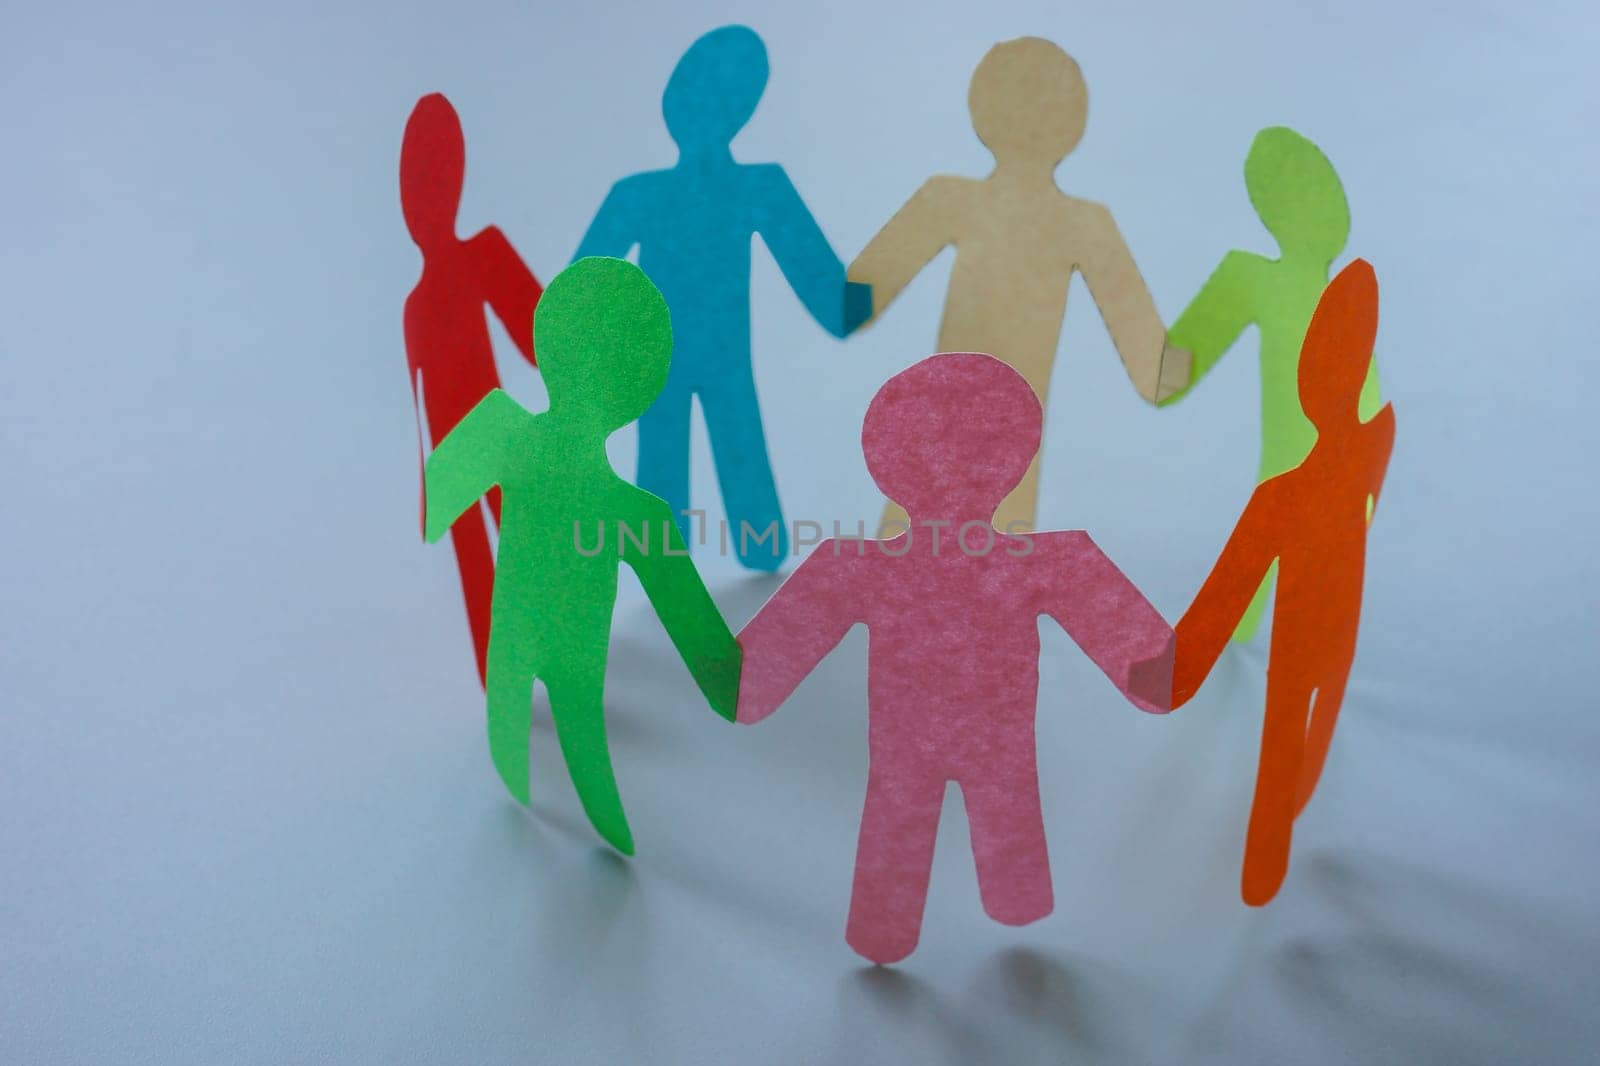 Circle of colored paper people. Concept of unity, diversity and teamwork. by designer491